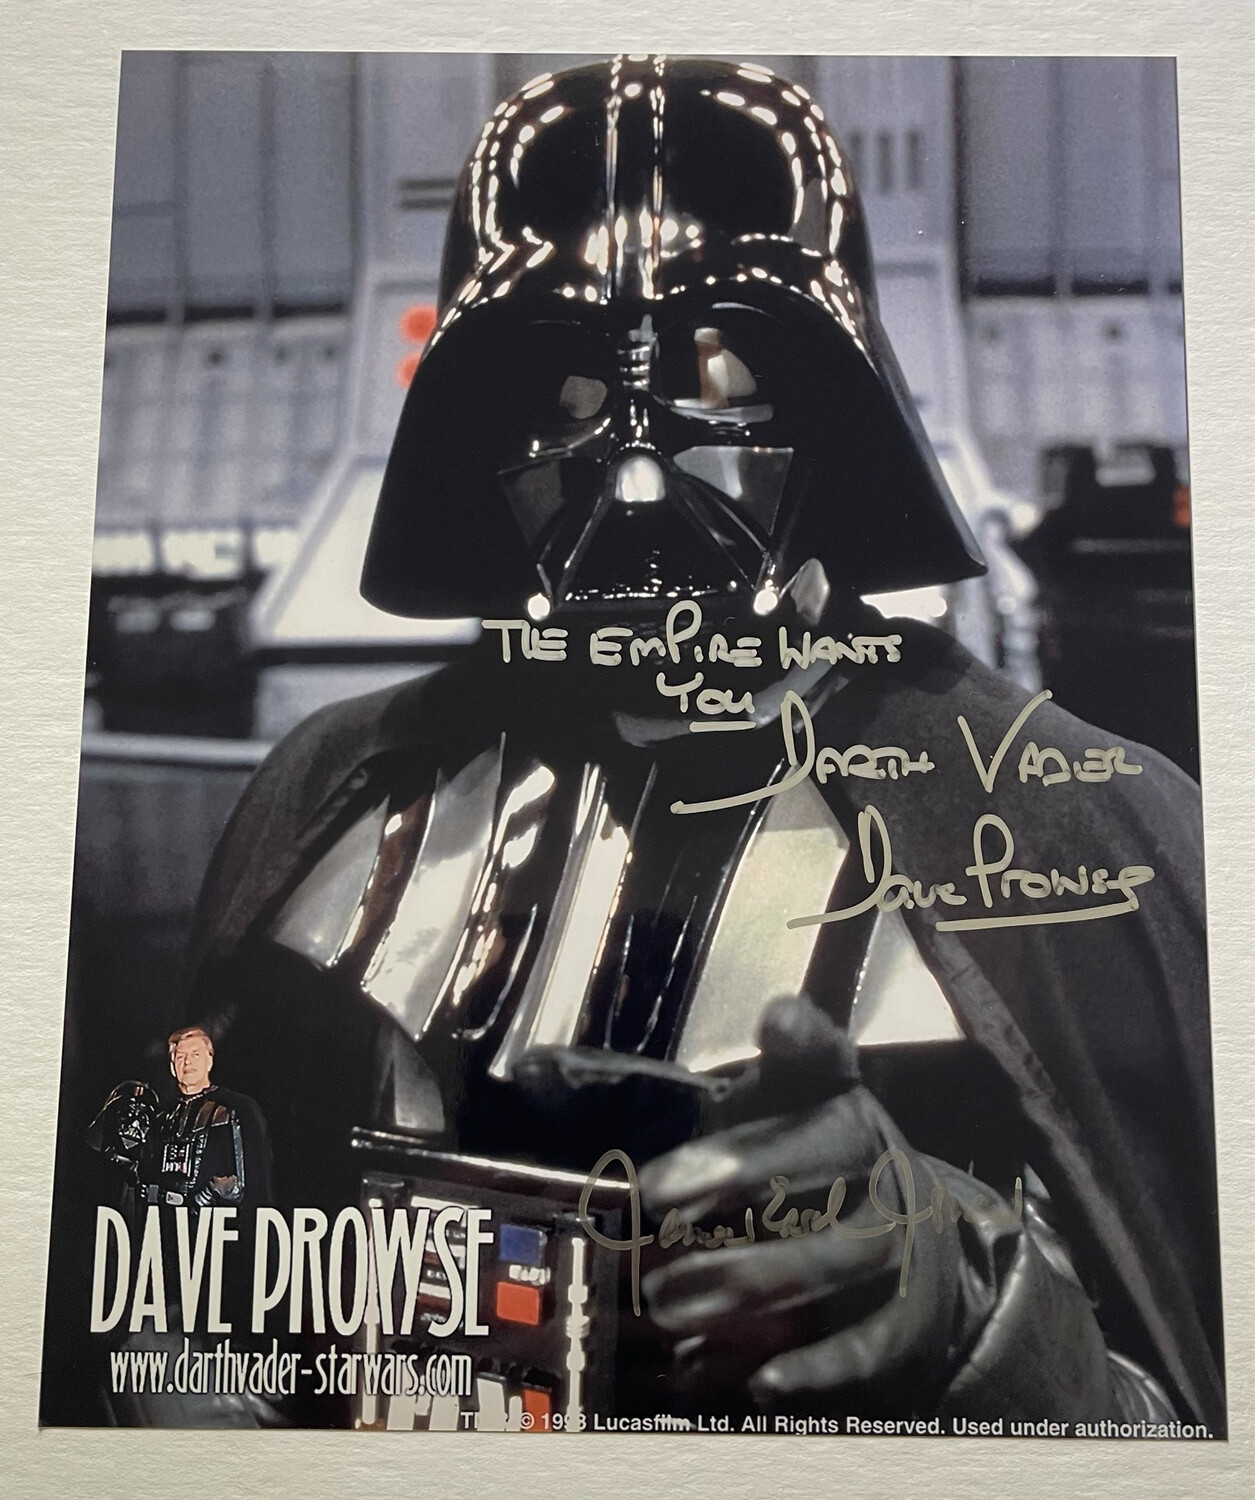 8X10 PHOTO SIGNED BY DAVE PROWSE AND JAMES EARL JONES